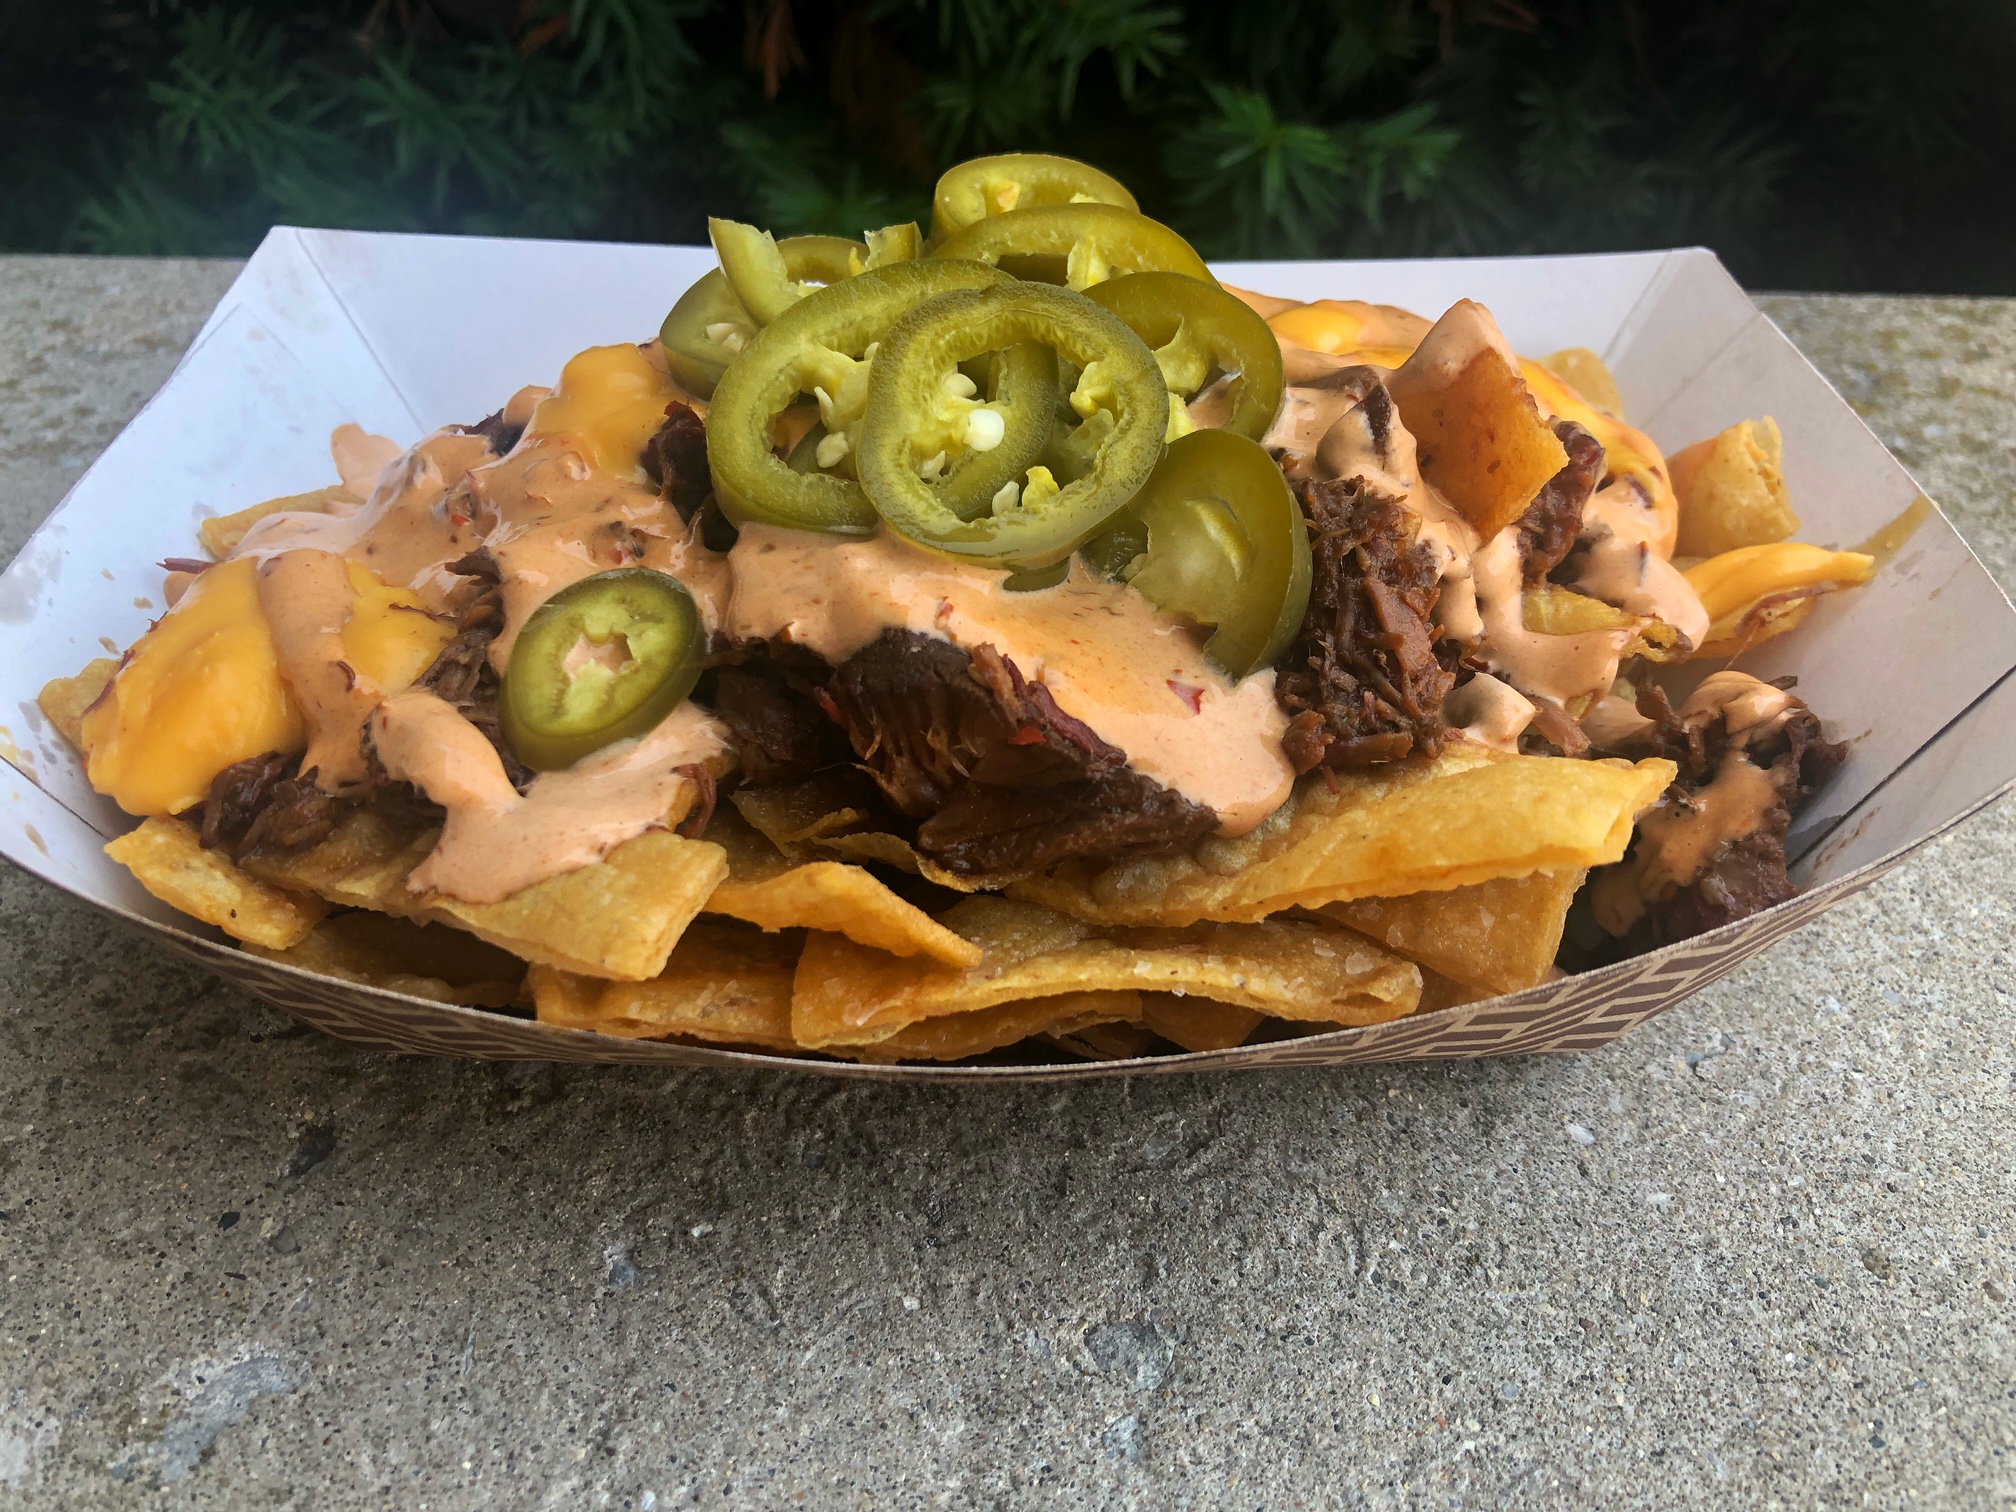 In a paper basket, there are rectangular corn chip strips with dark brown meat, orange sauce, and light green pickled jalapenos. Photo by Alyssa Buckley.